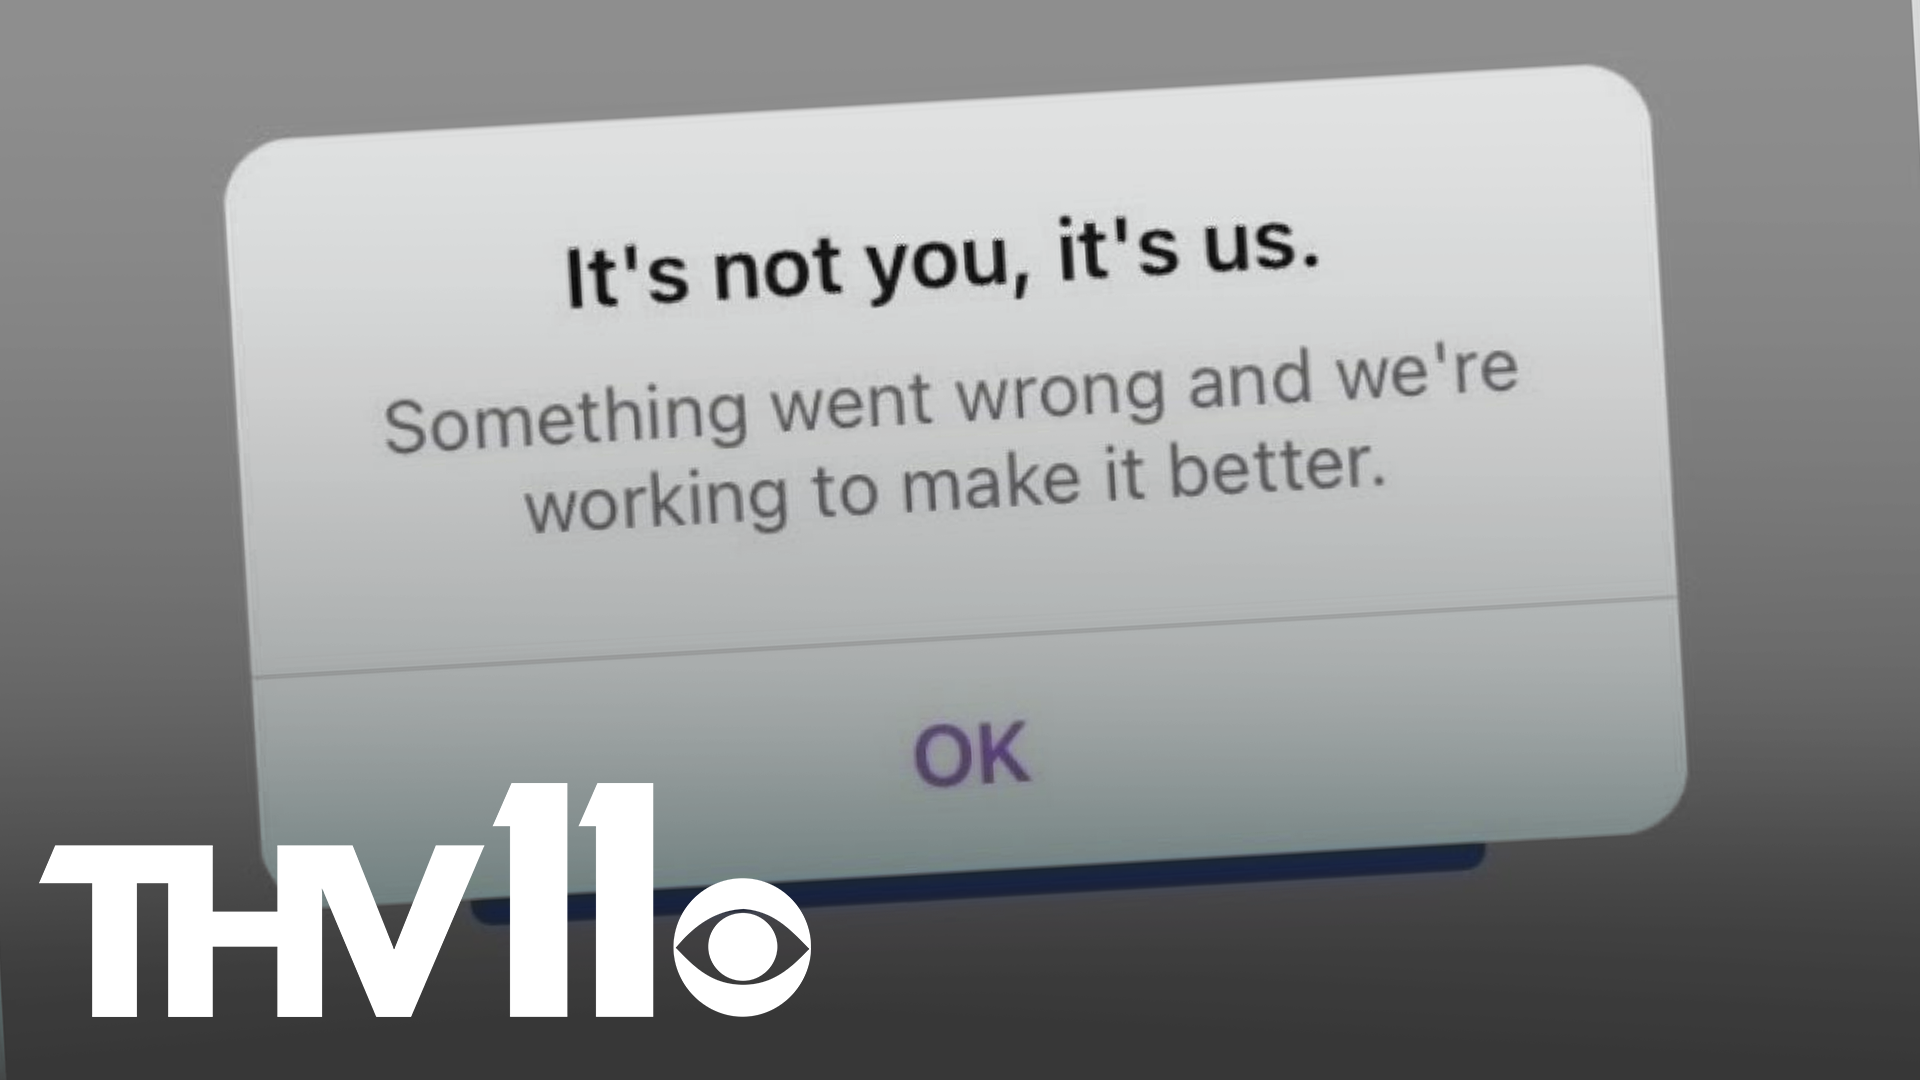 We spoke with a mental health professional after #FacebookDown about how social media impacts us and our daily routine.